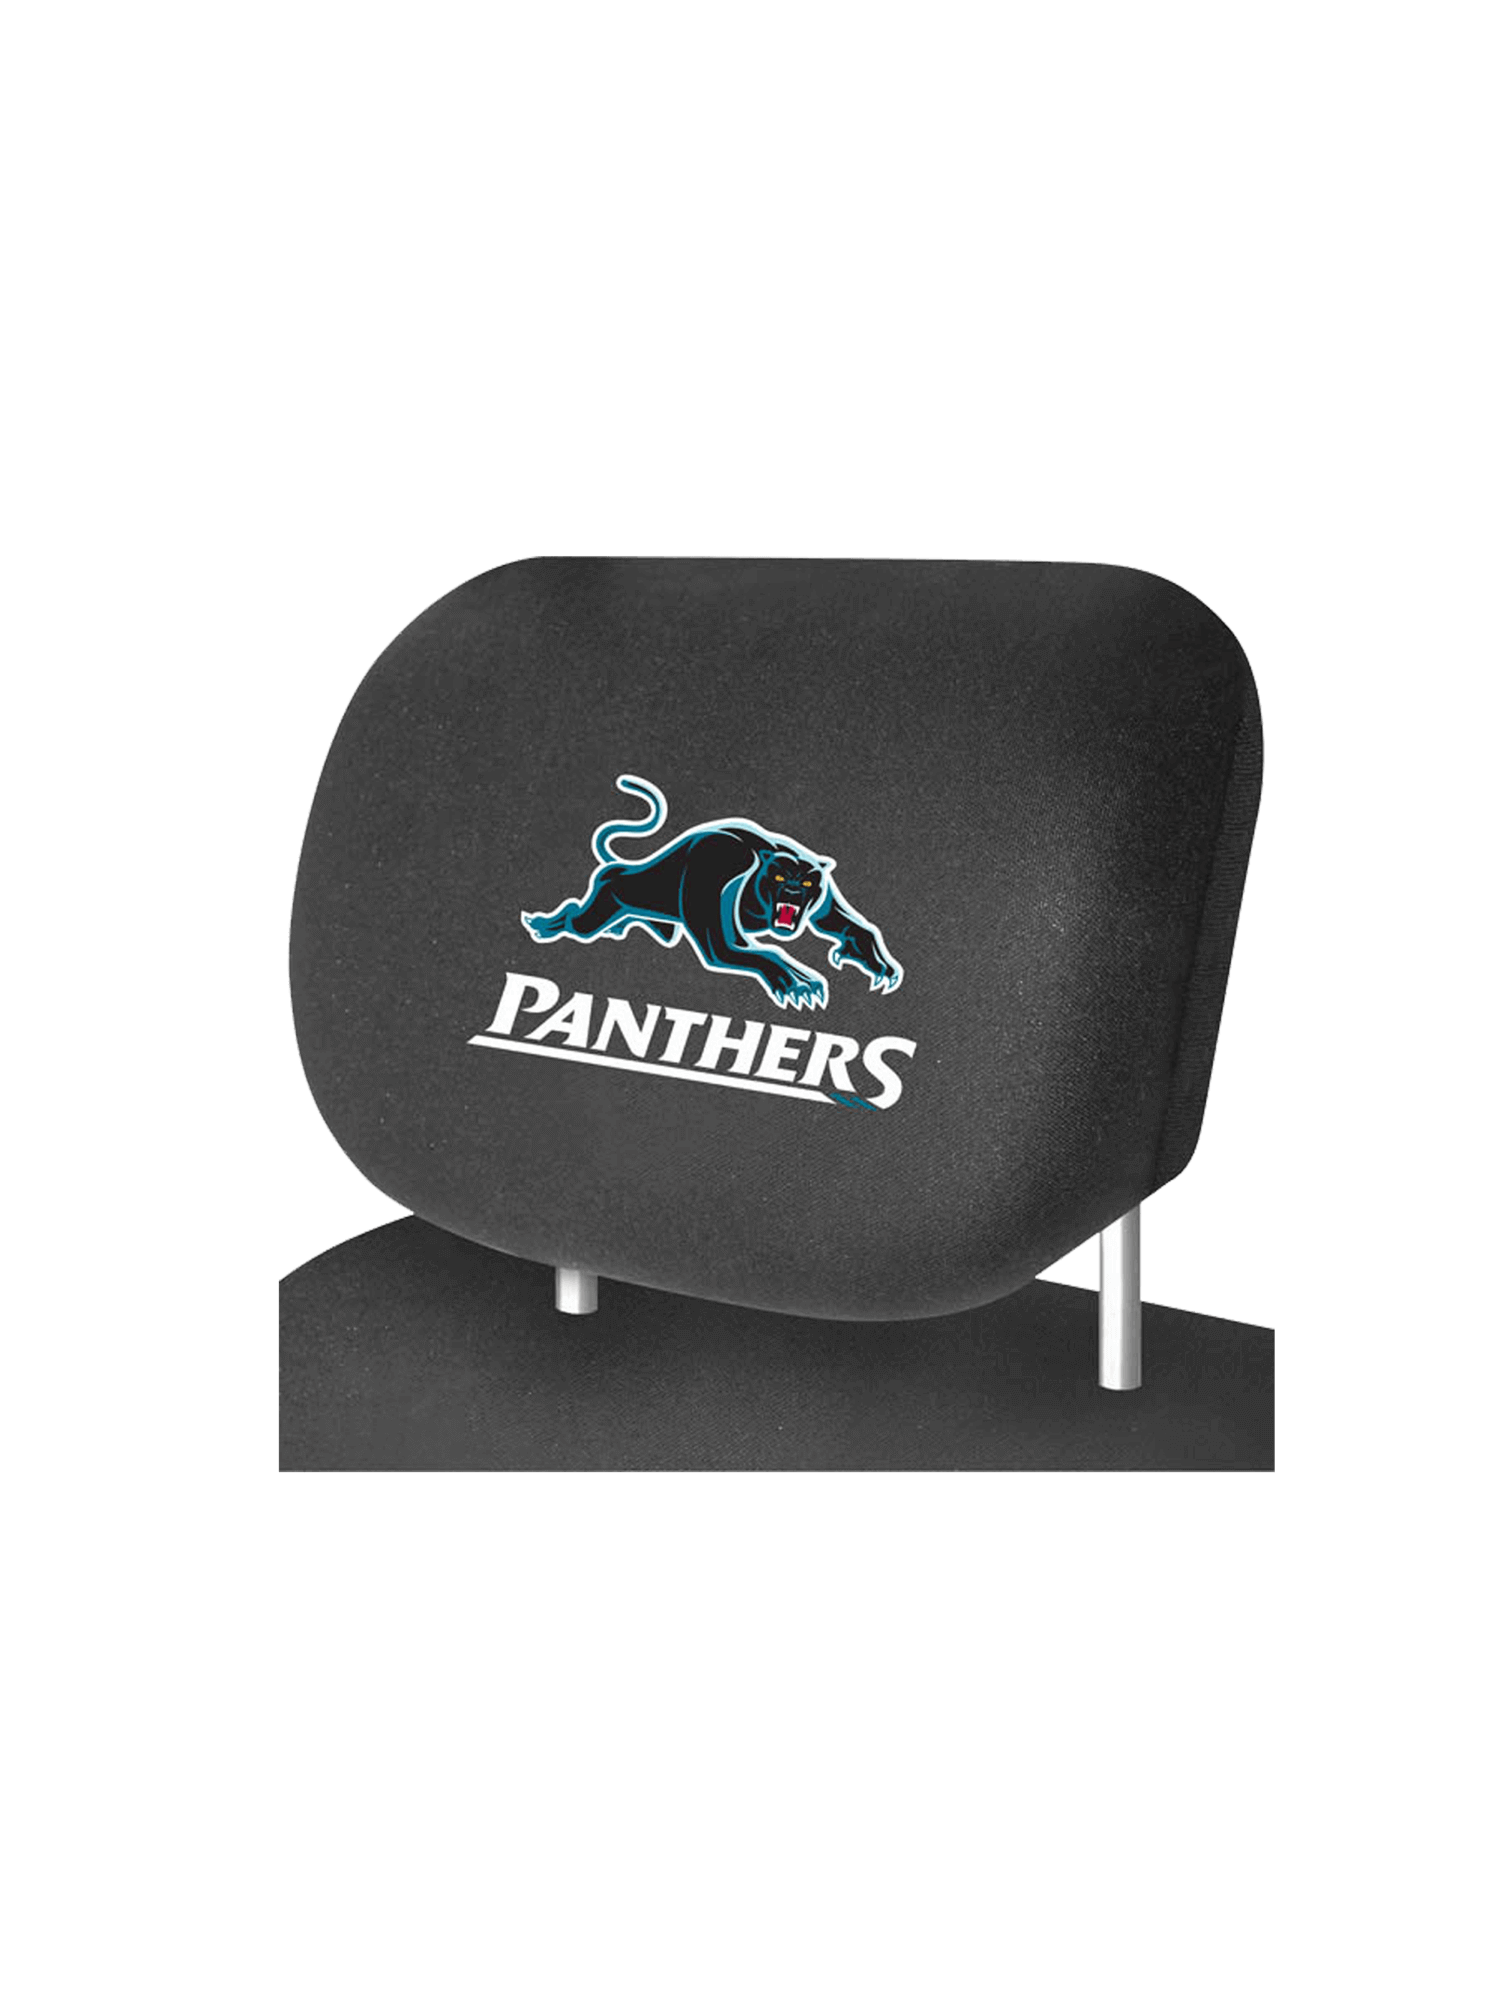 PENRITH PANTHERS OFFICIAL HEADREST COVER_PENRITH PANTHERS_STUBBY CLUB